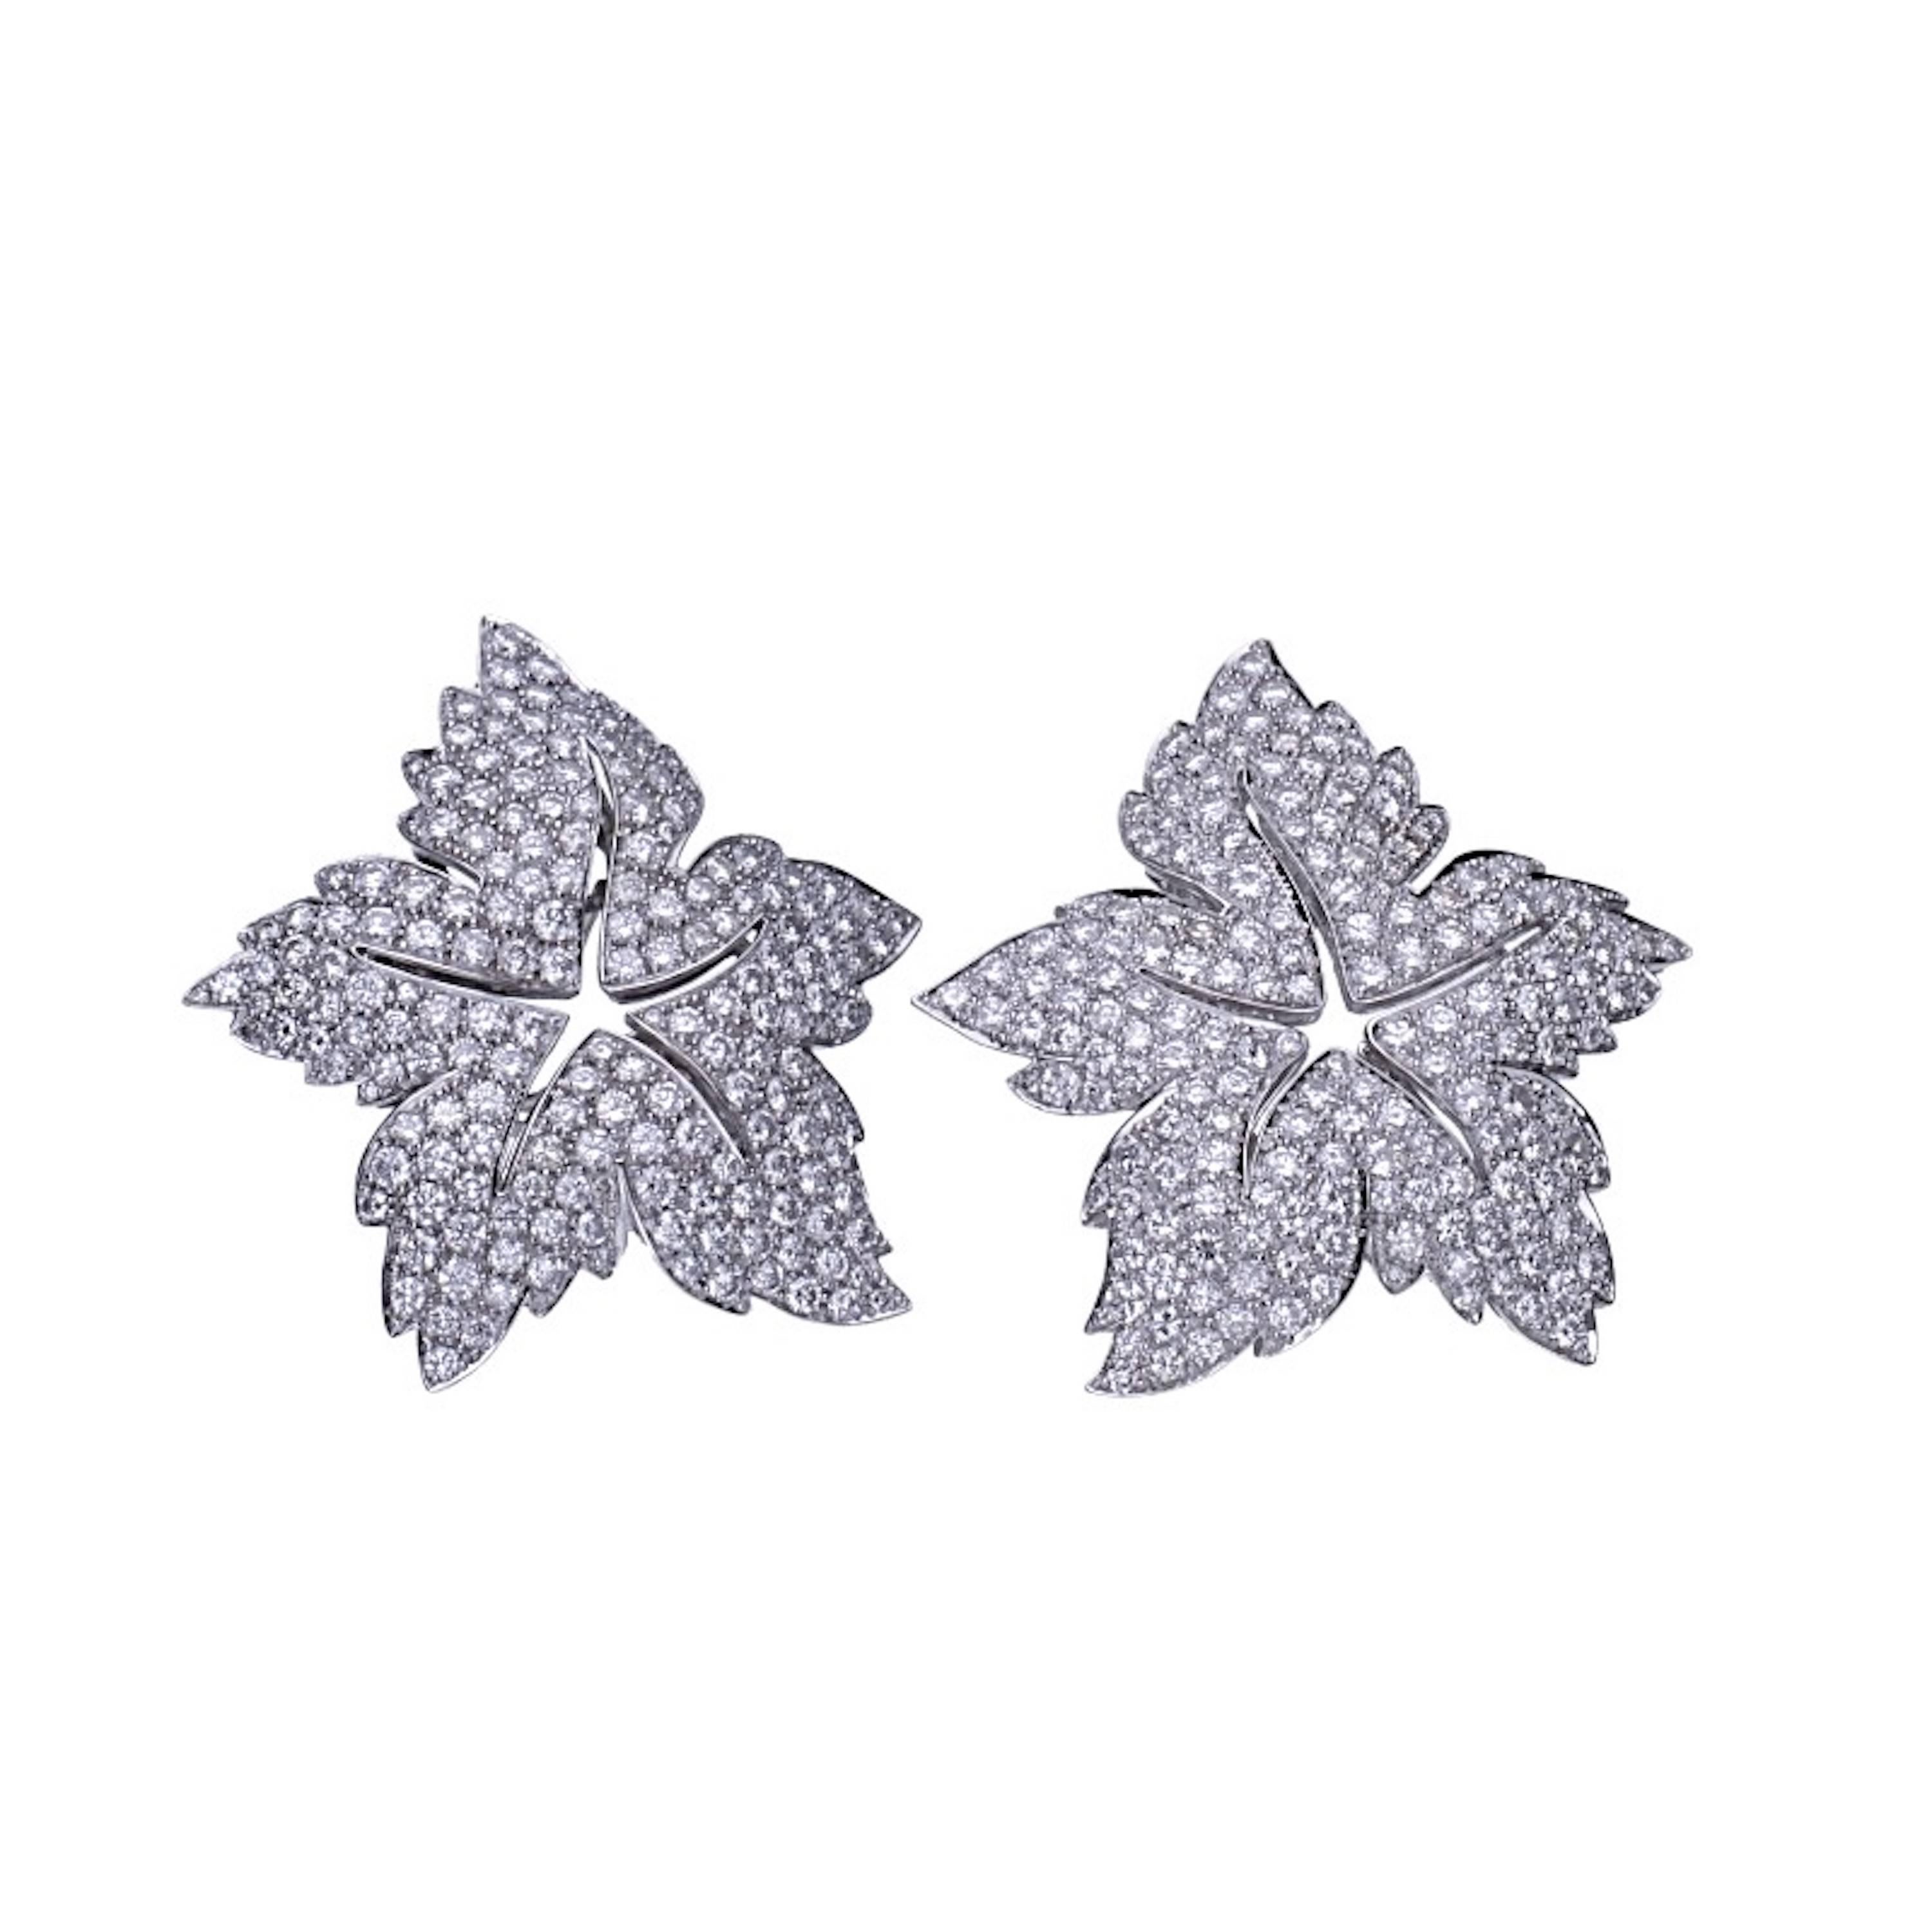 18 kt. white gold clip-on earrings with round-cut diamonds.
This amazing pair of earrings is designed as a star.
Round-cut diamonds: 15.10 carat ( H-I color/ VVS1-VVS2 ) 
18 kt. white gold: gr. 31.20
Diameter: cm. 4.40
Completely hand-made in